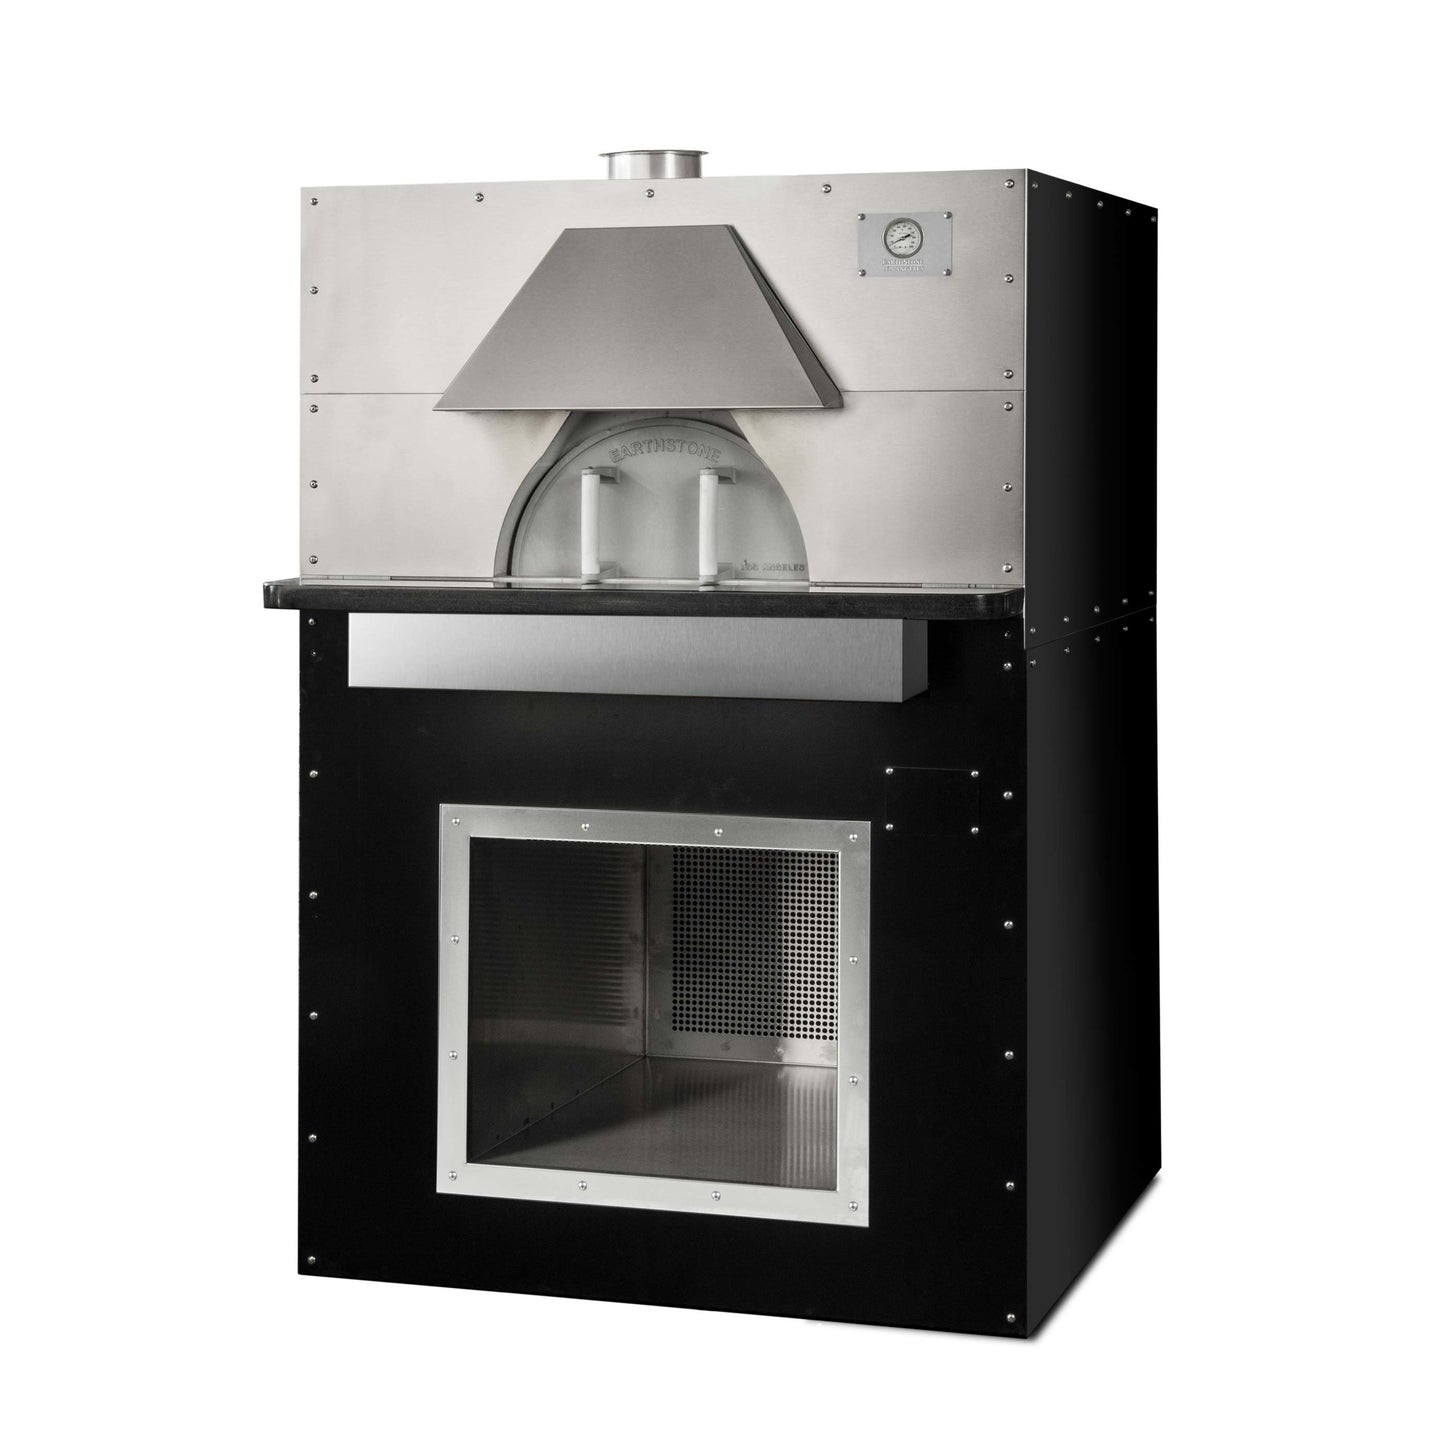 The Cafe-PAG – Gas Fired Pre-Assembled Oven